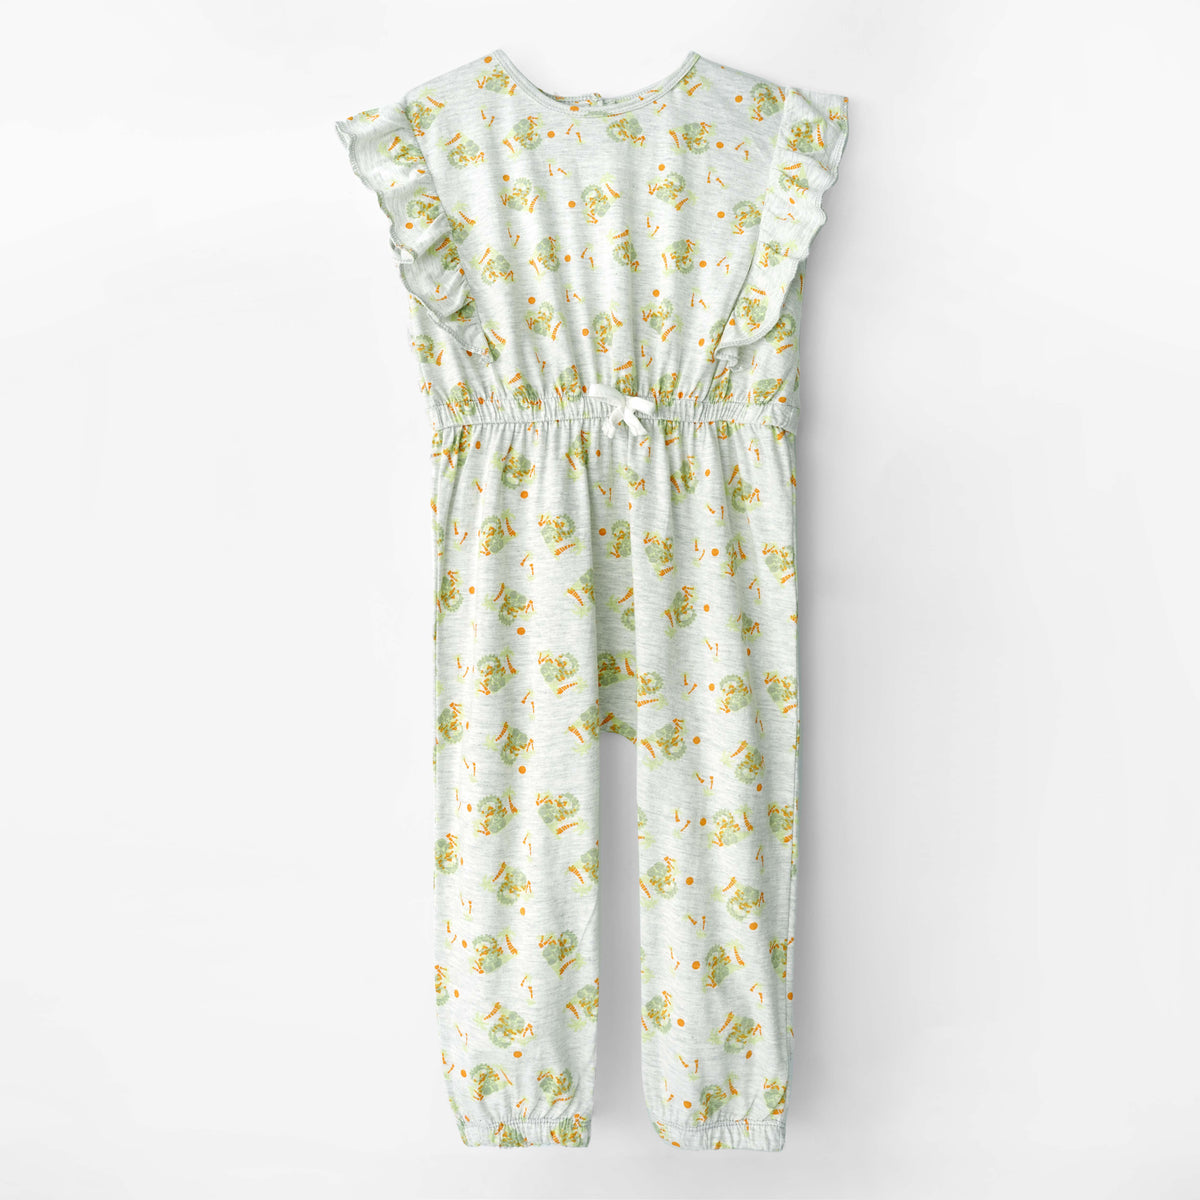 Girls All-Over Printed Soft Cotton Heather Grey Frill Jumpsuit